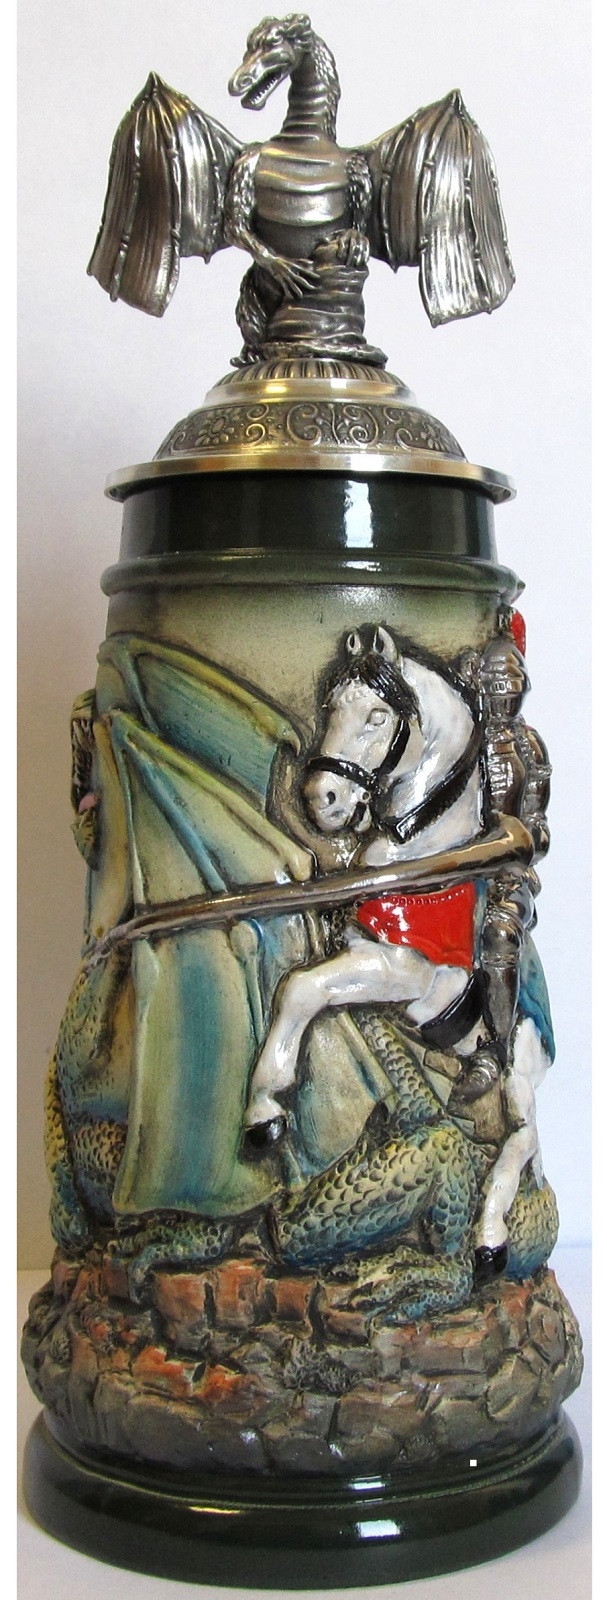 Rustic Medieval Knight Fighting Dragon with Dragon Lid LE German Beer Stein .5 L